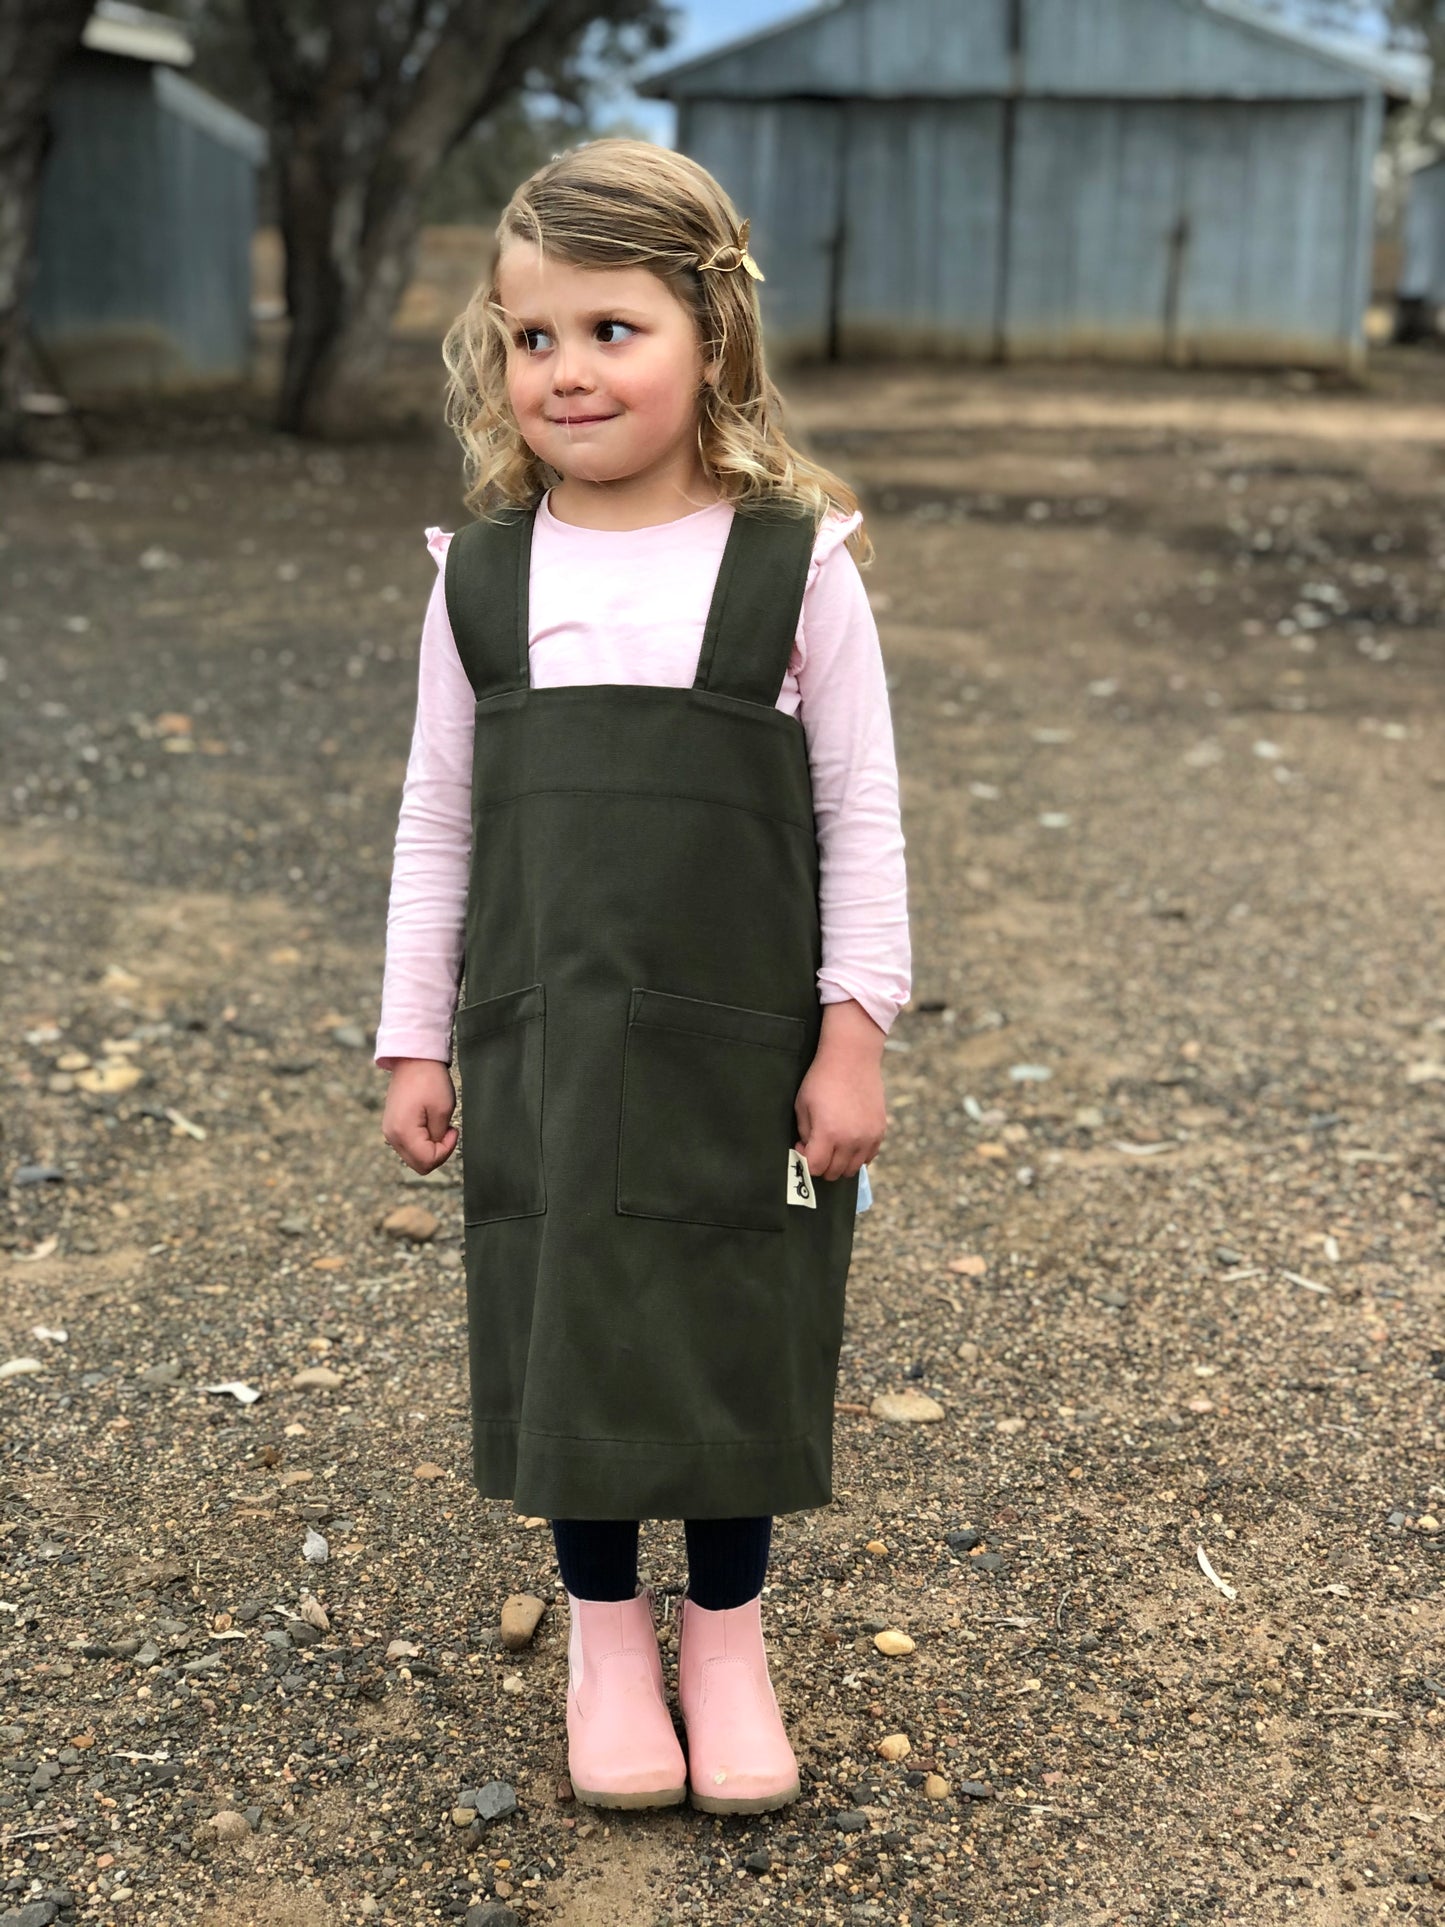 Kids' Pinafore Apron in Forest Green